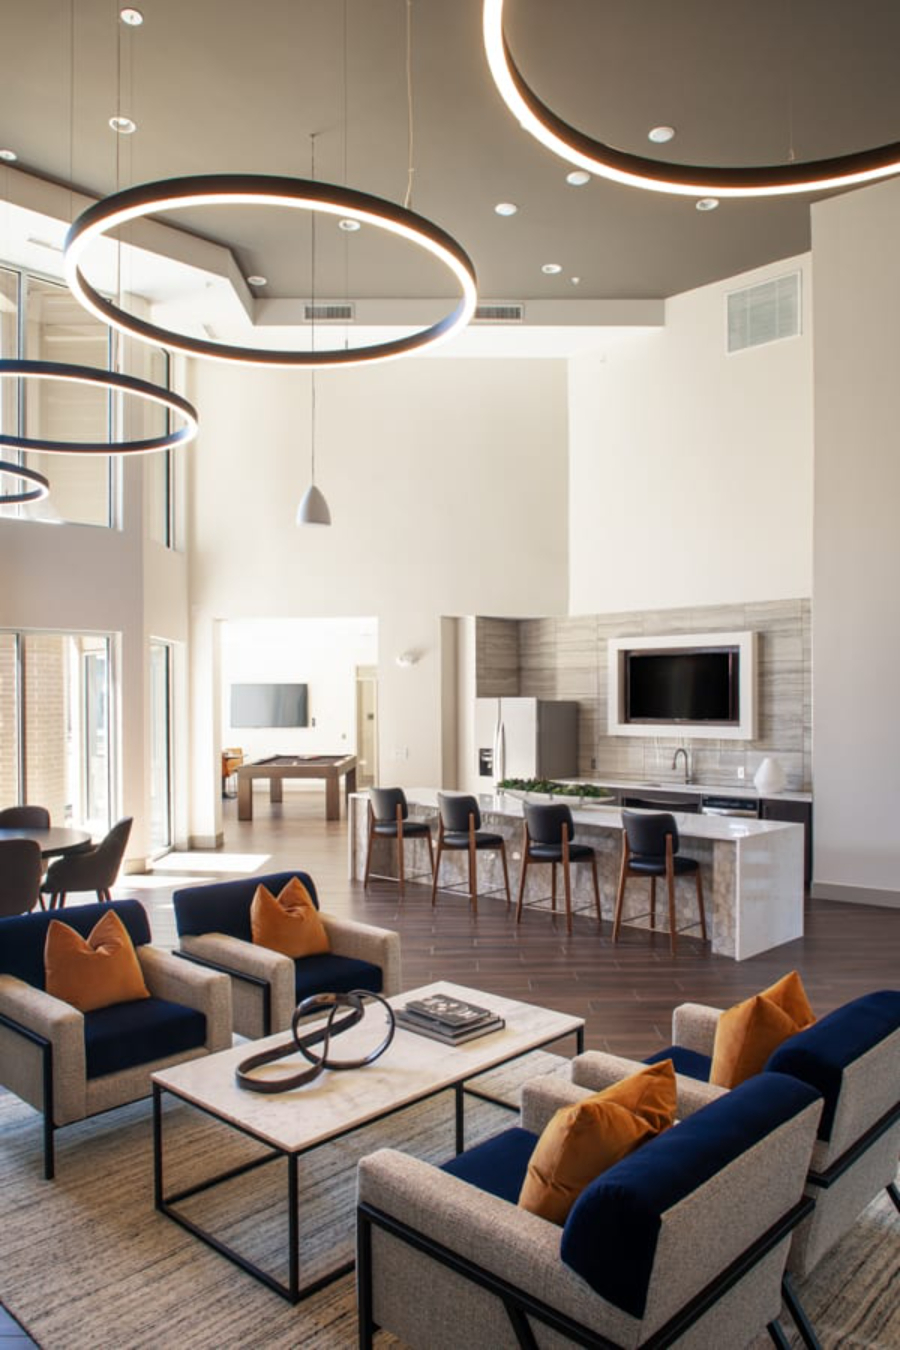 SJL Design Group: Interior Design In Texas. In this open space area there is a lounge area, a kitchenette, and there's a billiard room we can see in the background. On the main living area, there are four huge circular suspension lights.